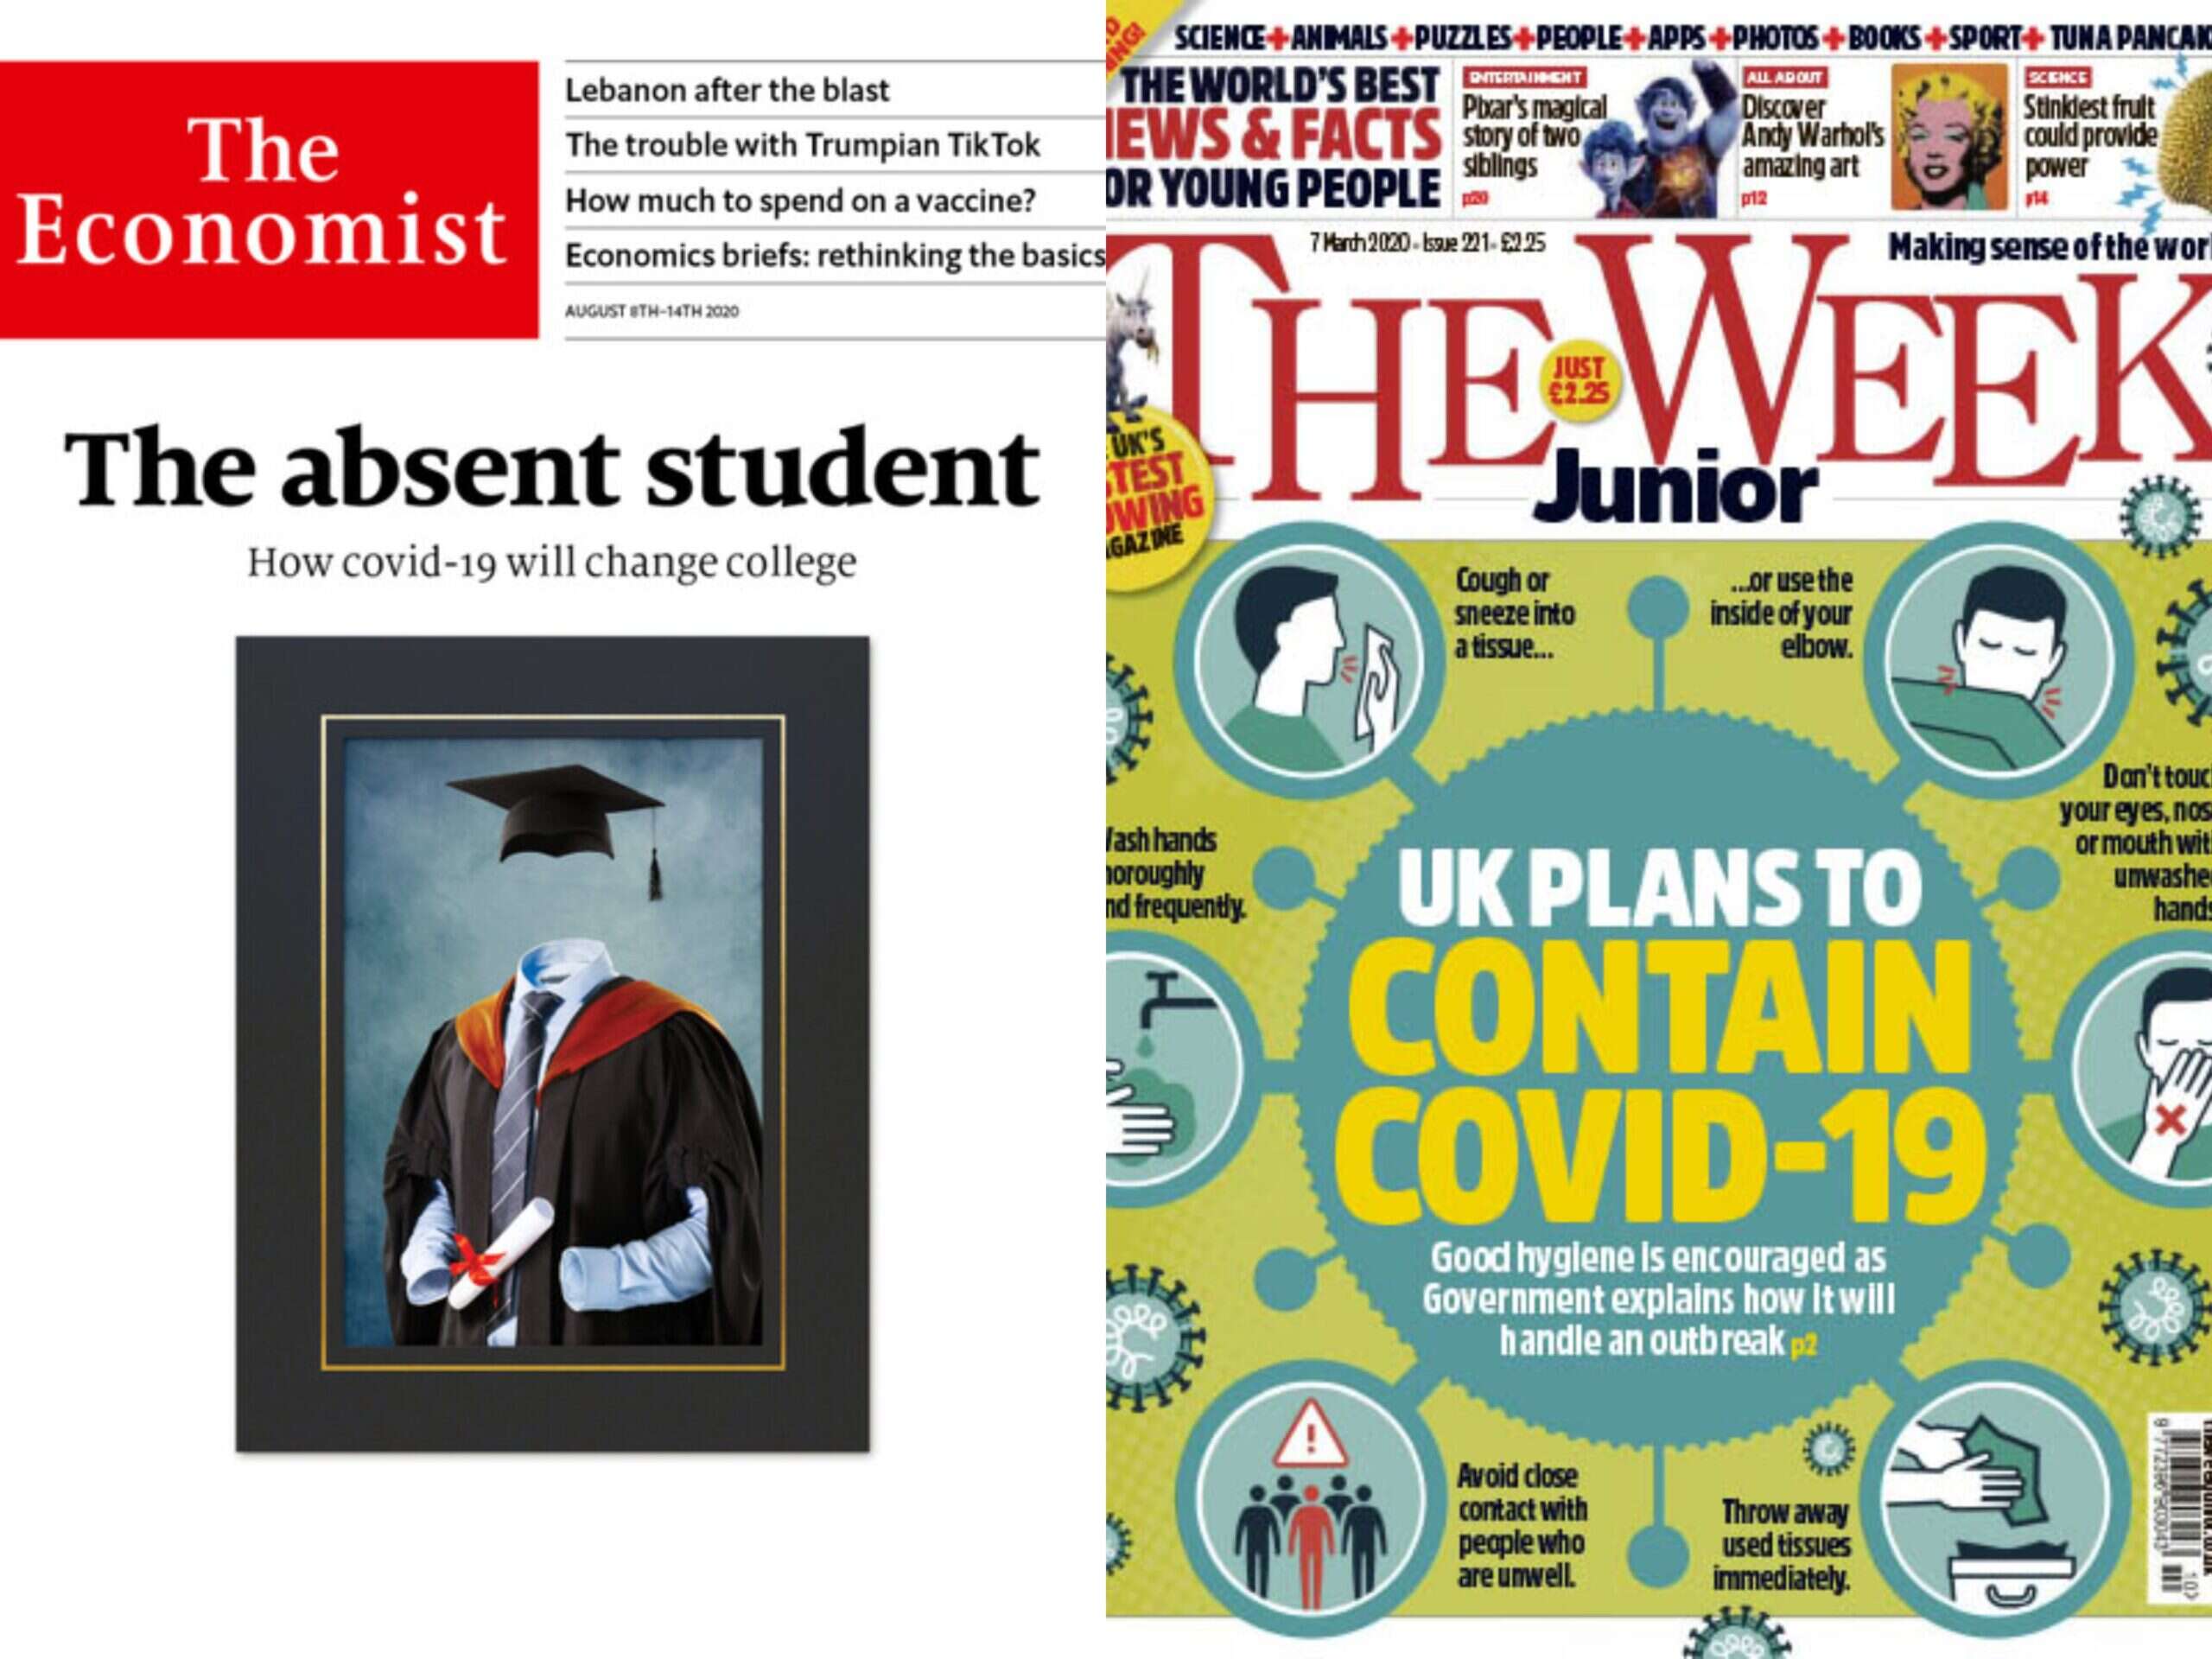 News magazine ABCs: The Week Junior circulation up by a fifth despite pandemic